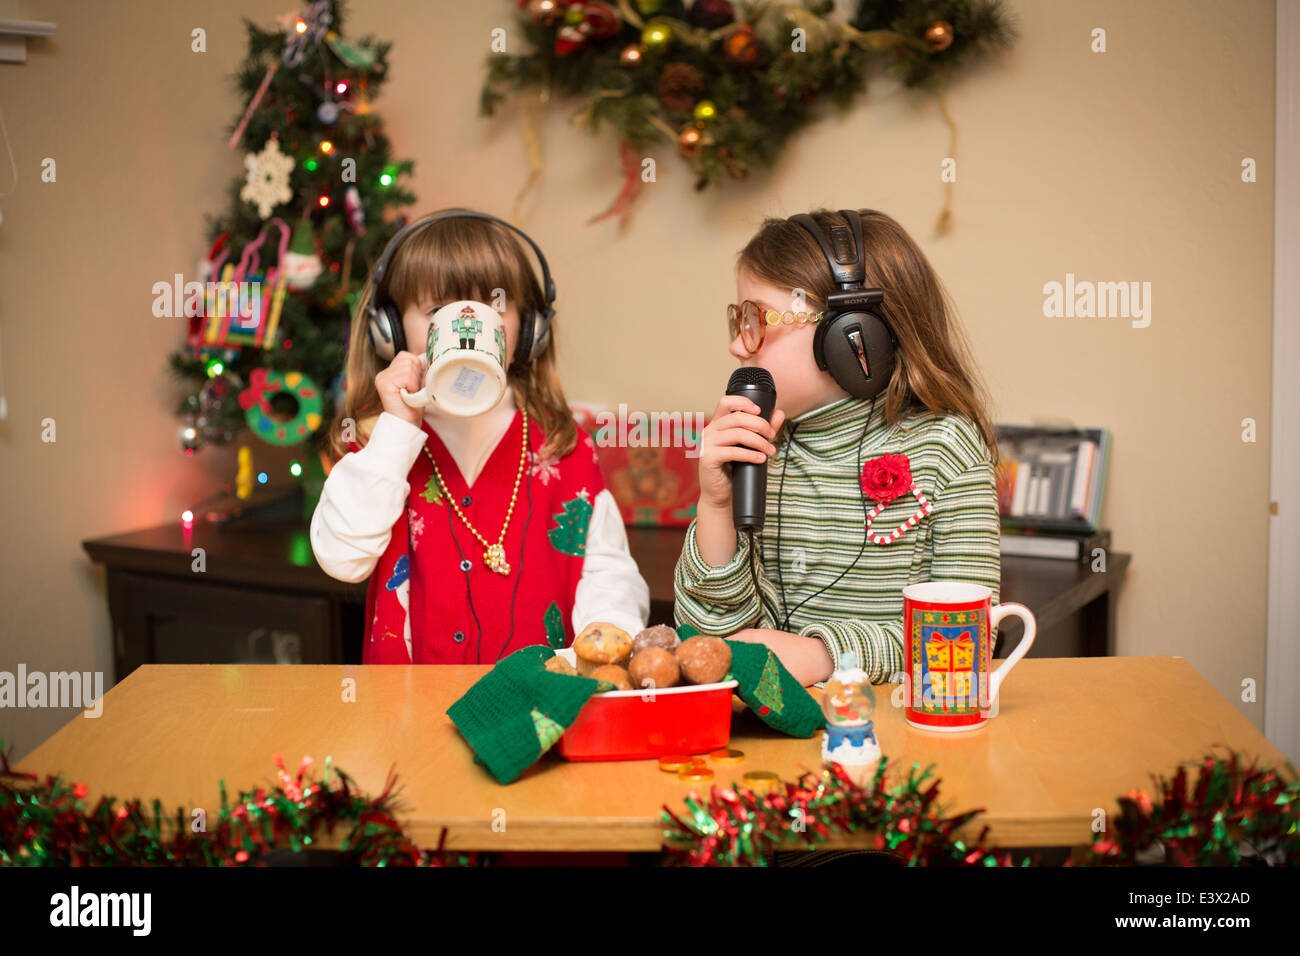 Two little girls with donut holes running a radio show on Christmas. Stock Photo